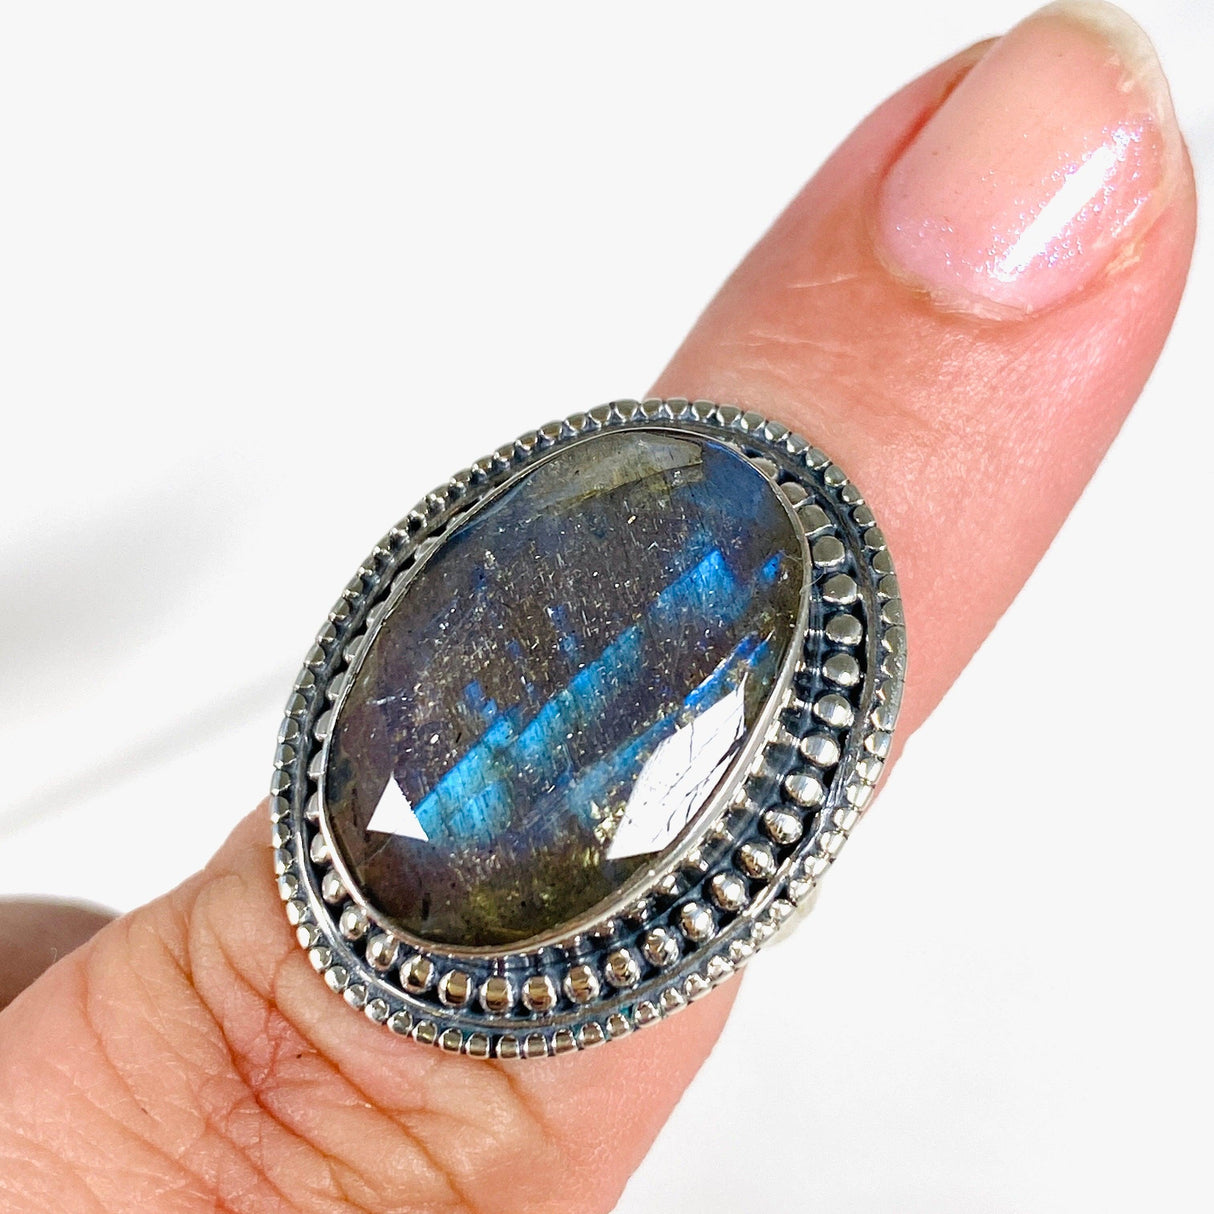 Blue iridescent Labradorite faceted gemstone ring set in silver on a finger